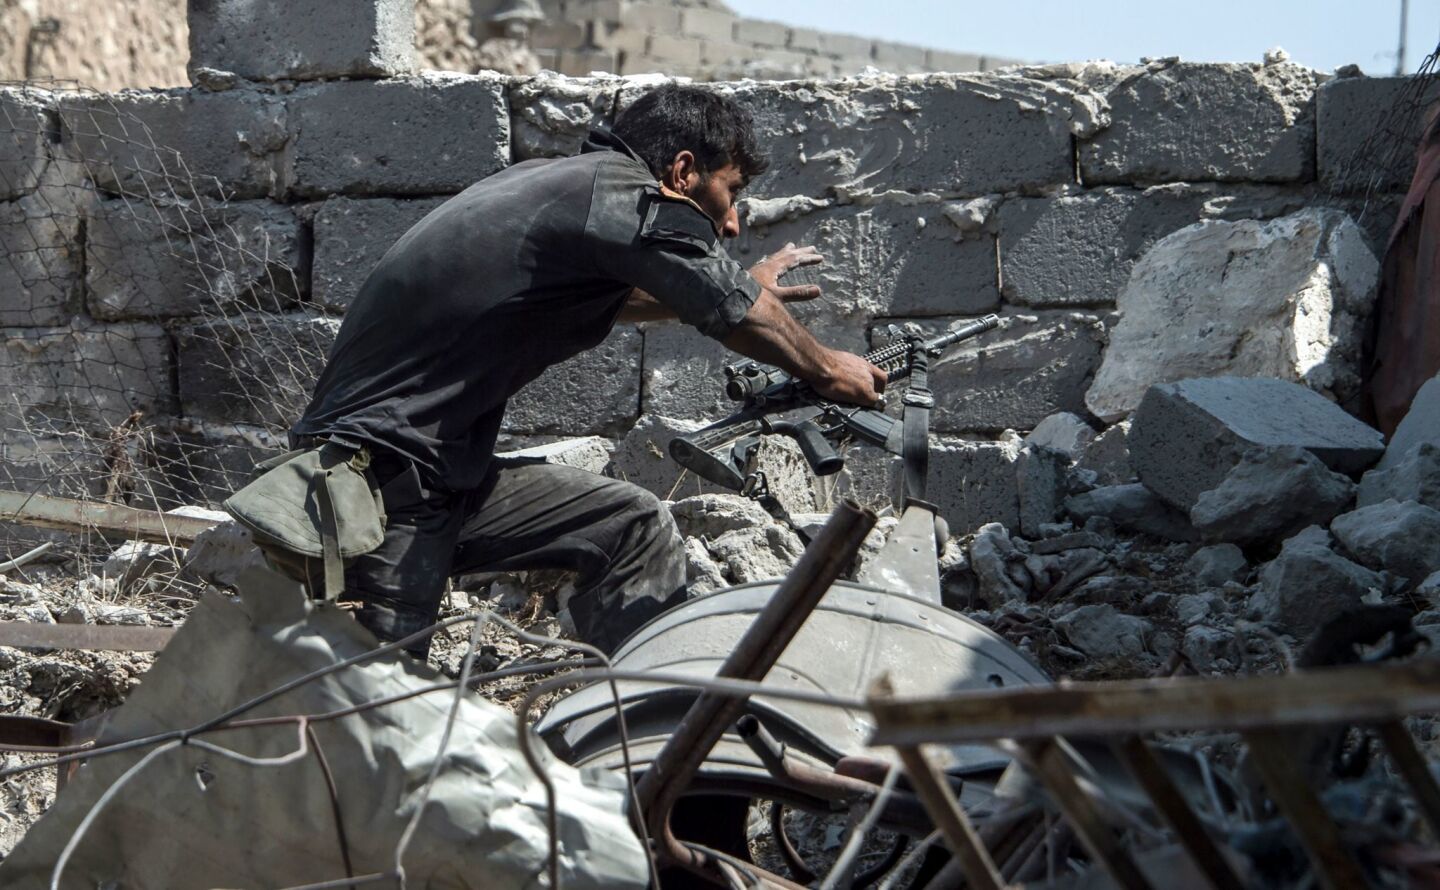 A member of the Iraqi forces walks through the rubble while carrying an M4 assault rifle in the Old City of Mosul on July 10, 2017, during the offensive to retake the embattled city from Islamic State fighters.